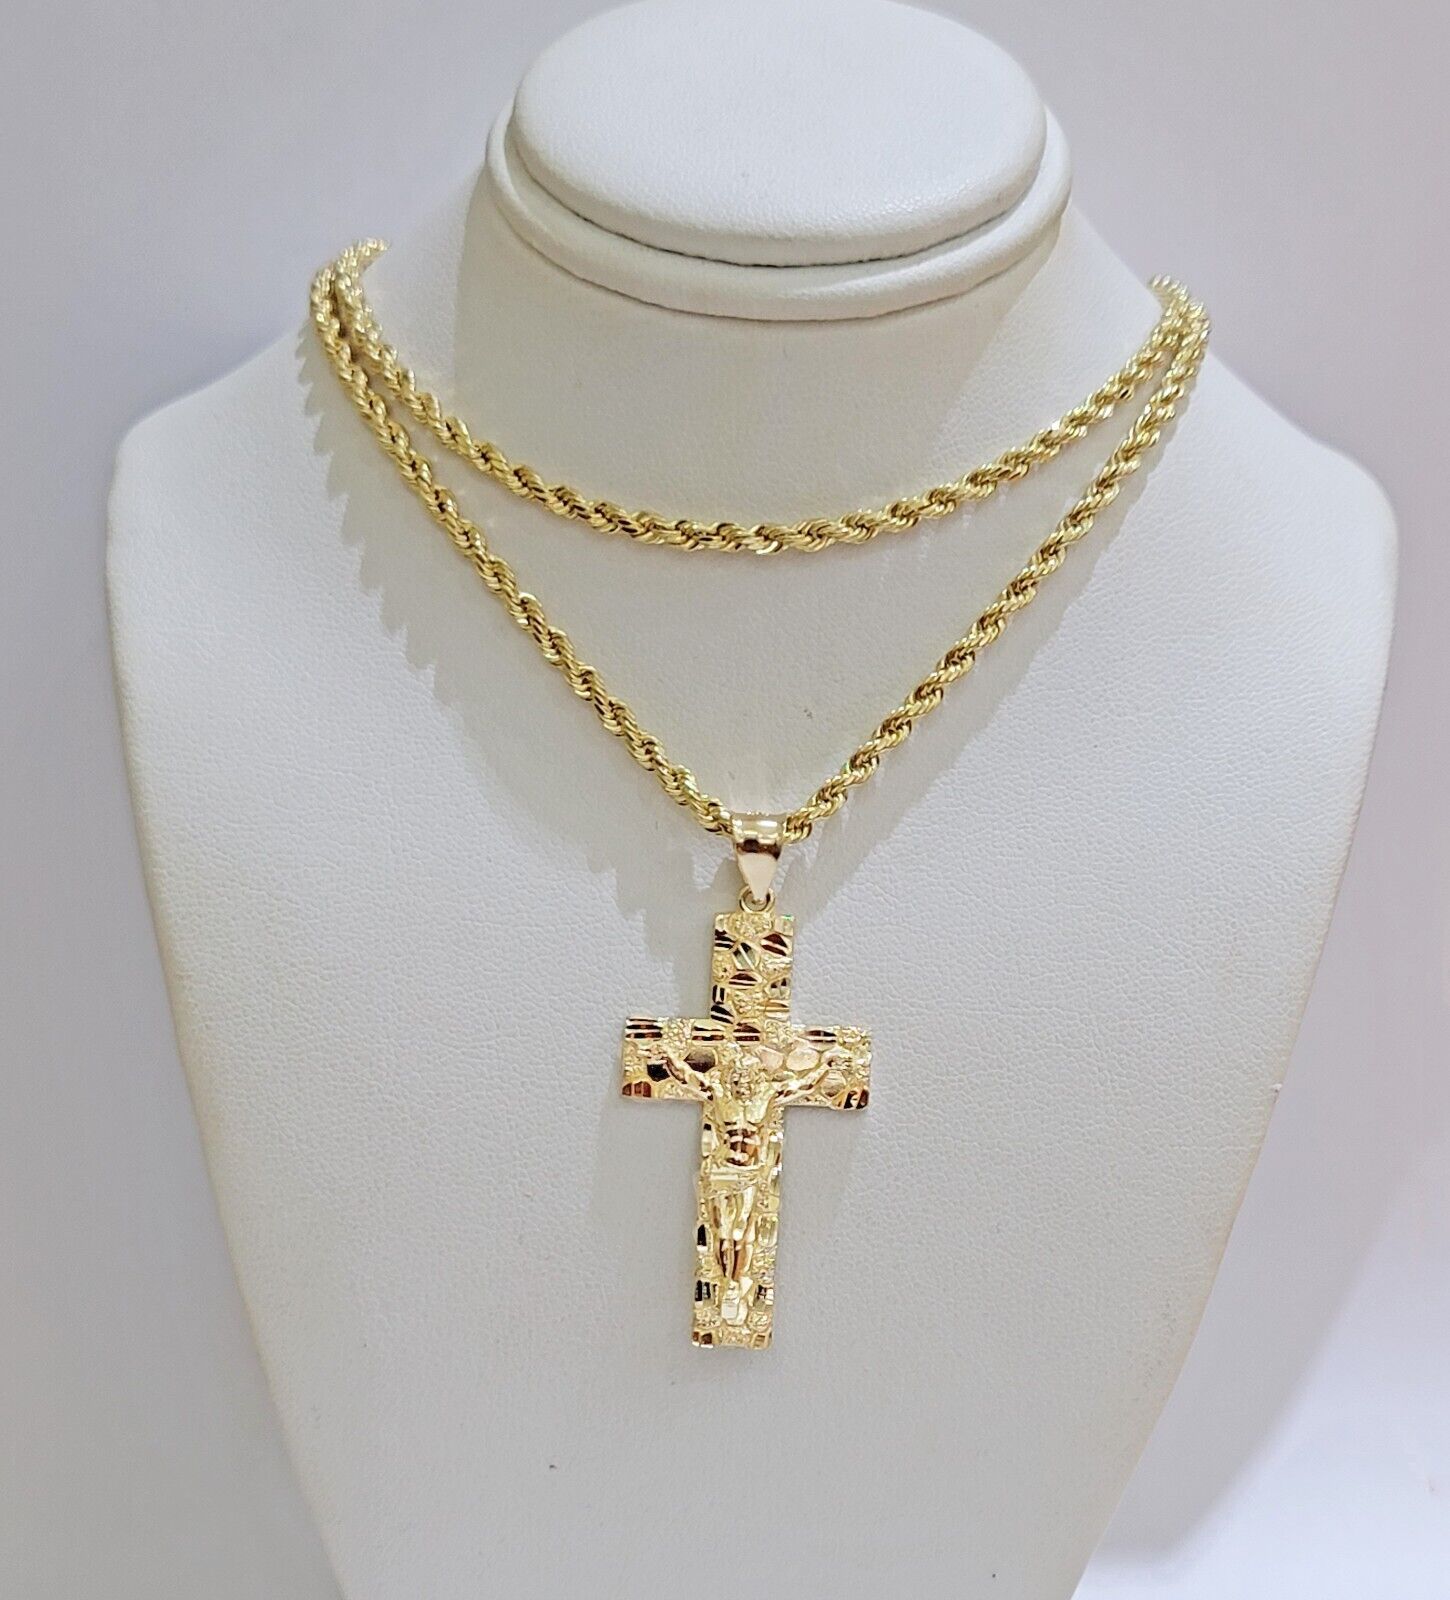 10k Yellow Gold Rope Chain Nugget Cross Charm Set 26 Inch necklace pendant, REAL